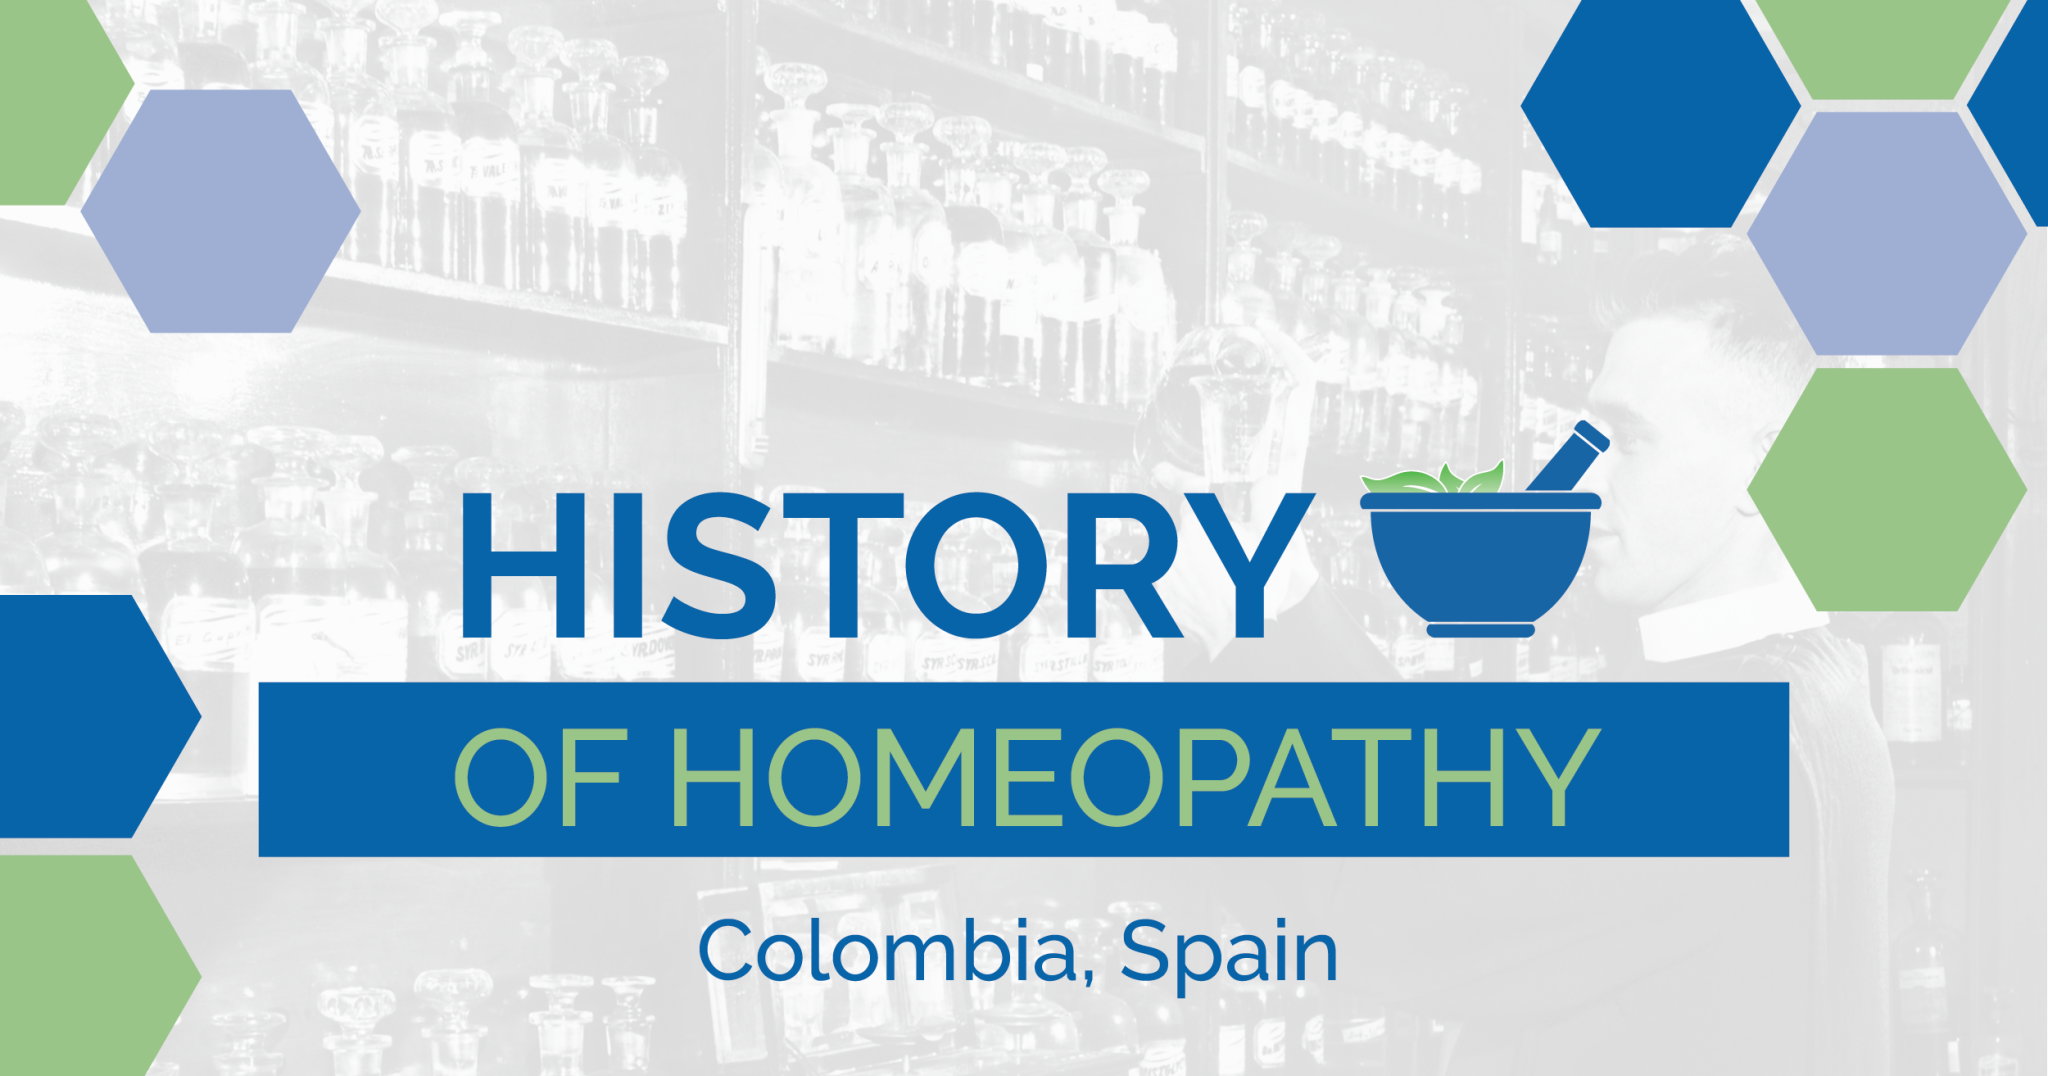 History of homeopathy countries5